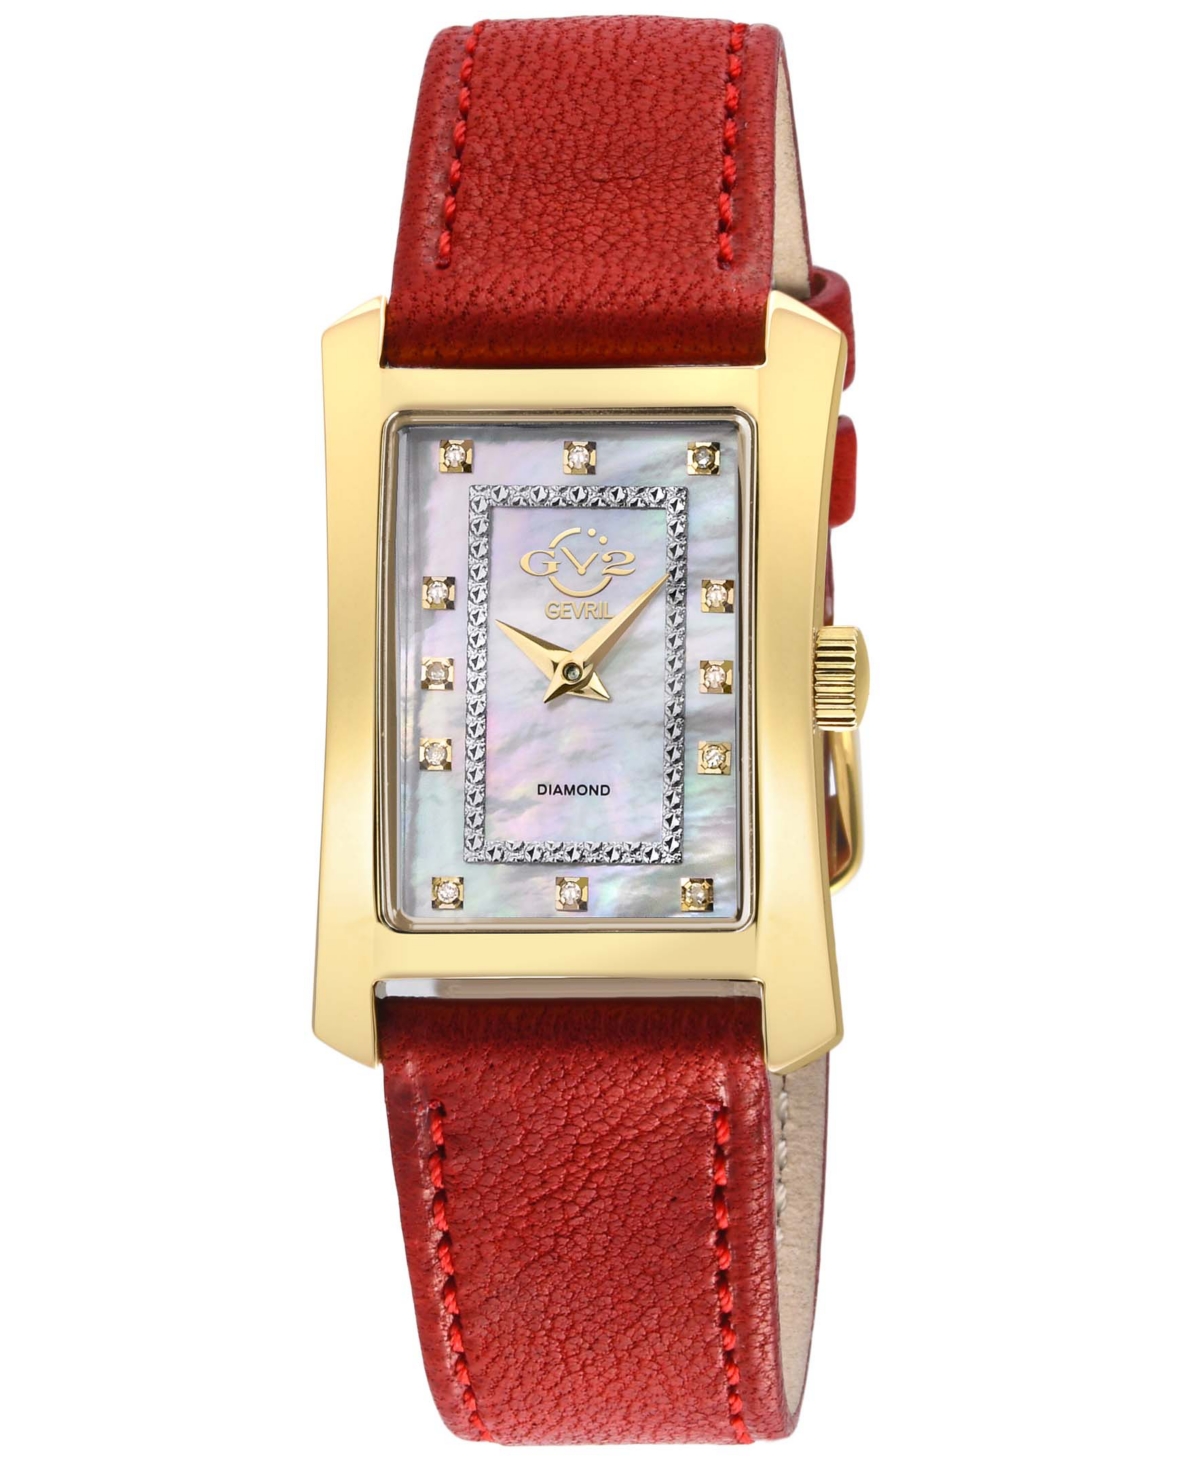 Gv2 By Gevril Women's Luino Swiss Quartz Red Leather Watch 29mm